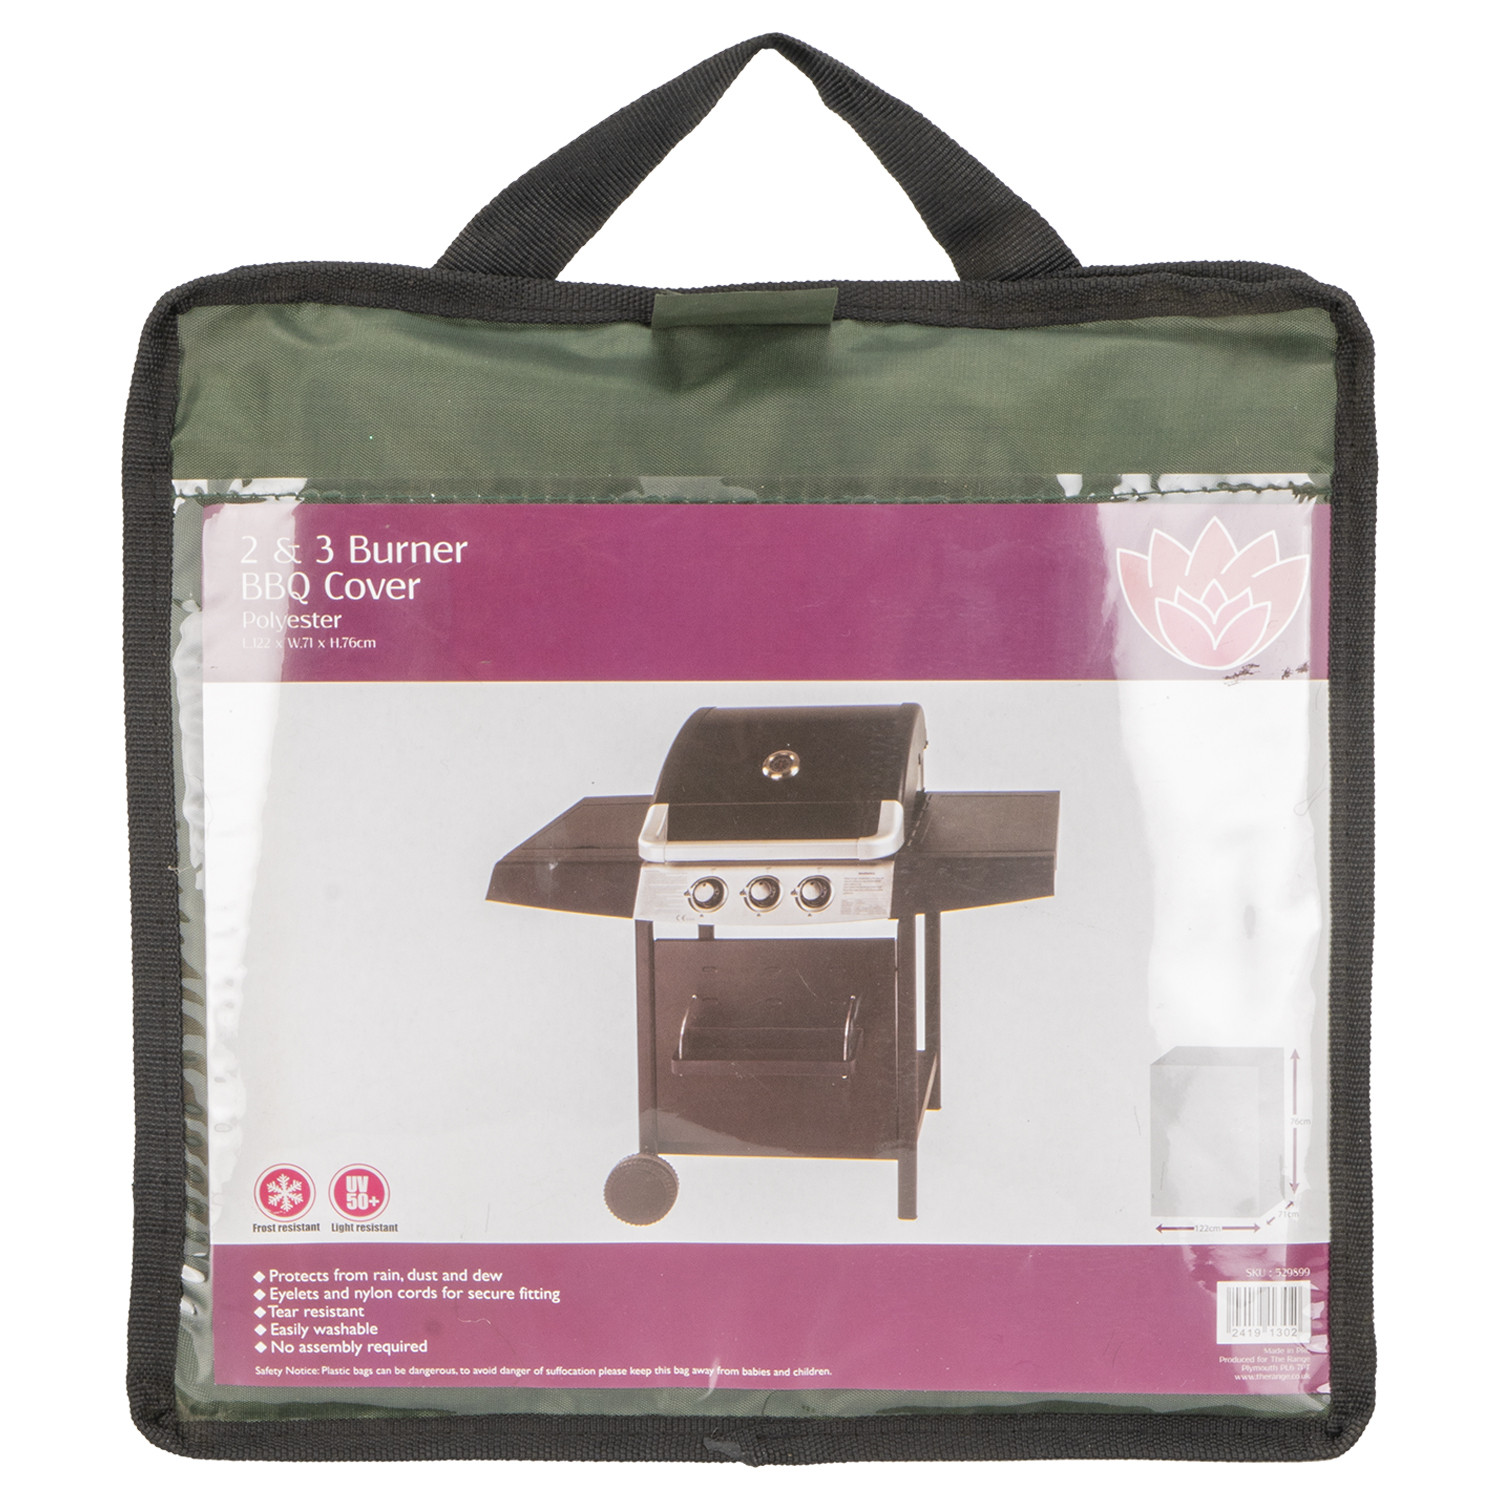 2 and 3 Burner BBQ Cover - Green Image